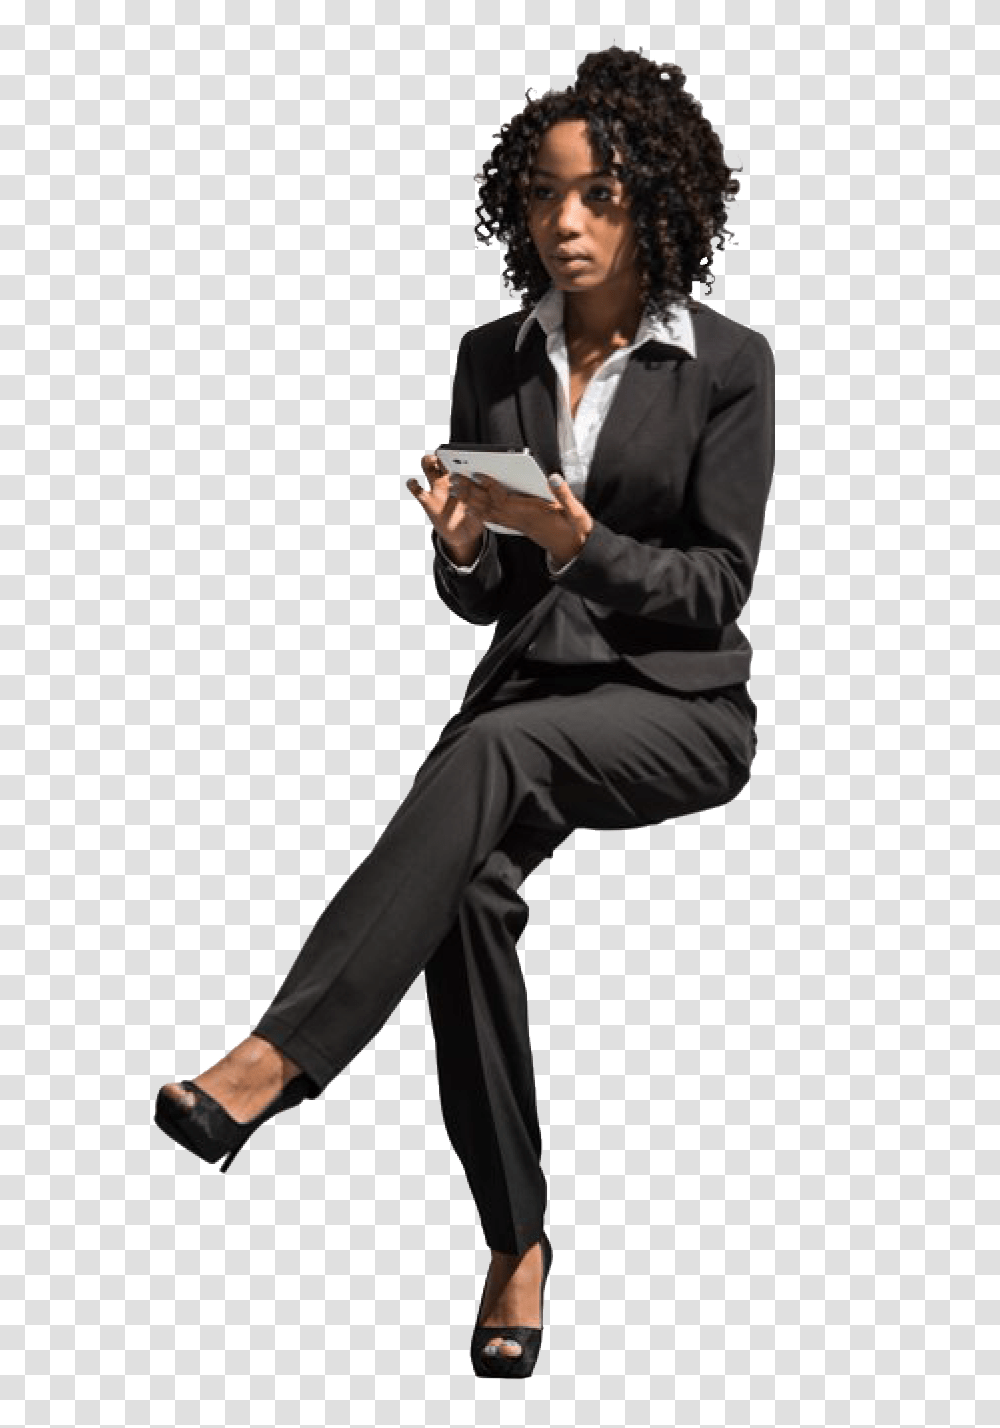 Download Hd Cutout Woman Sitting People Business People Sitting, Person, Suit, Overcoat, Clothing Transparent Png